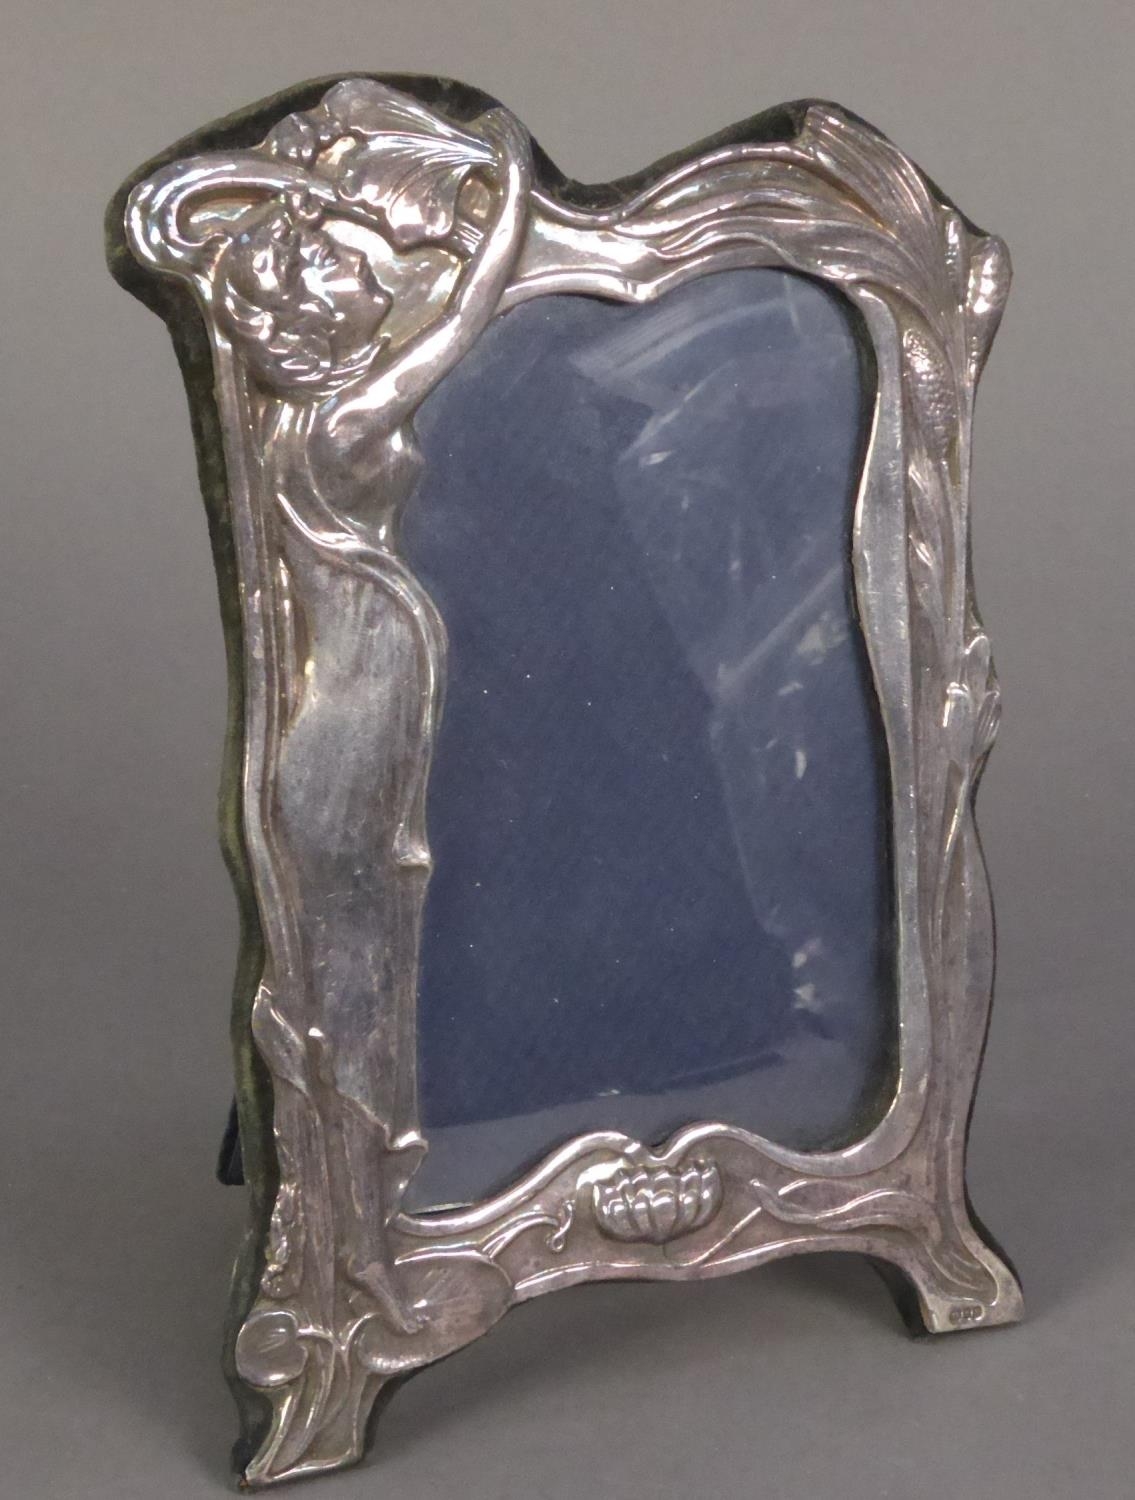 MODERN EMBOSSED SILVER FRONTED DESK TOP PHOTOGRAPH FRAME, with Art Nouveau female figure and plush - Image 2 of 2